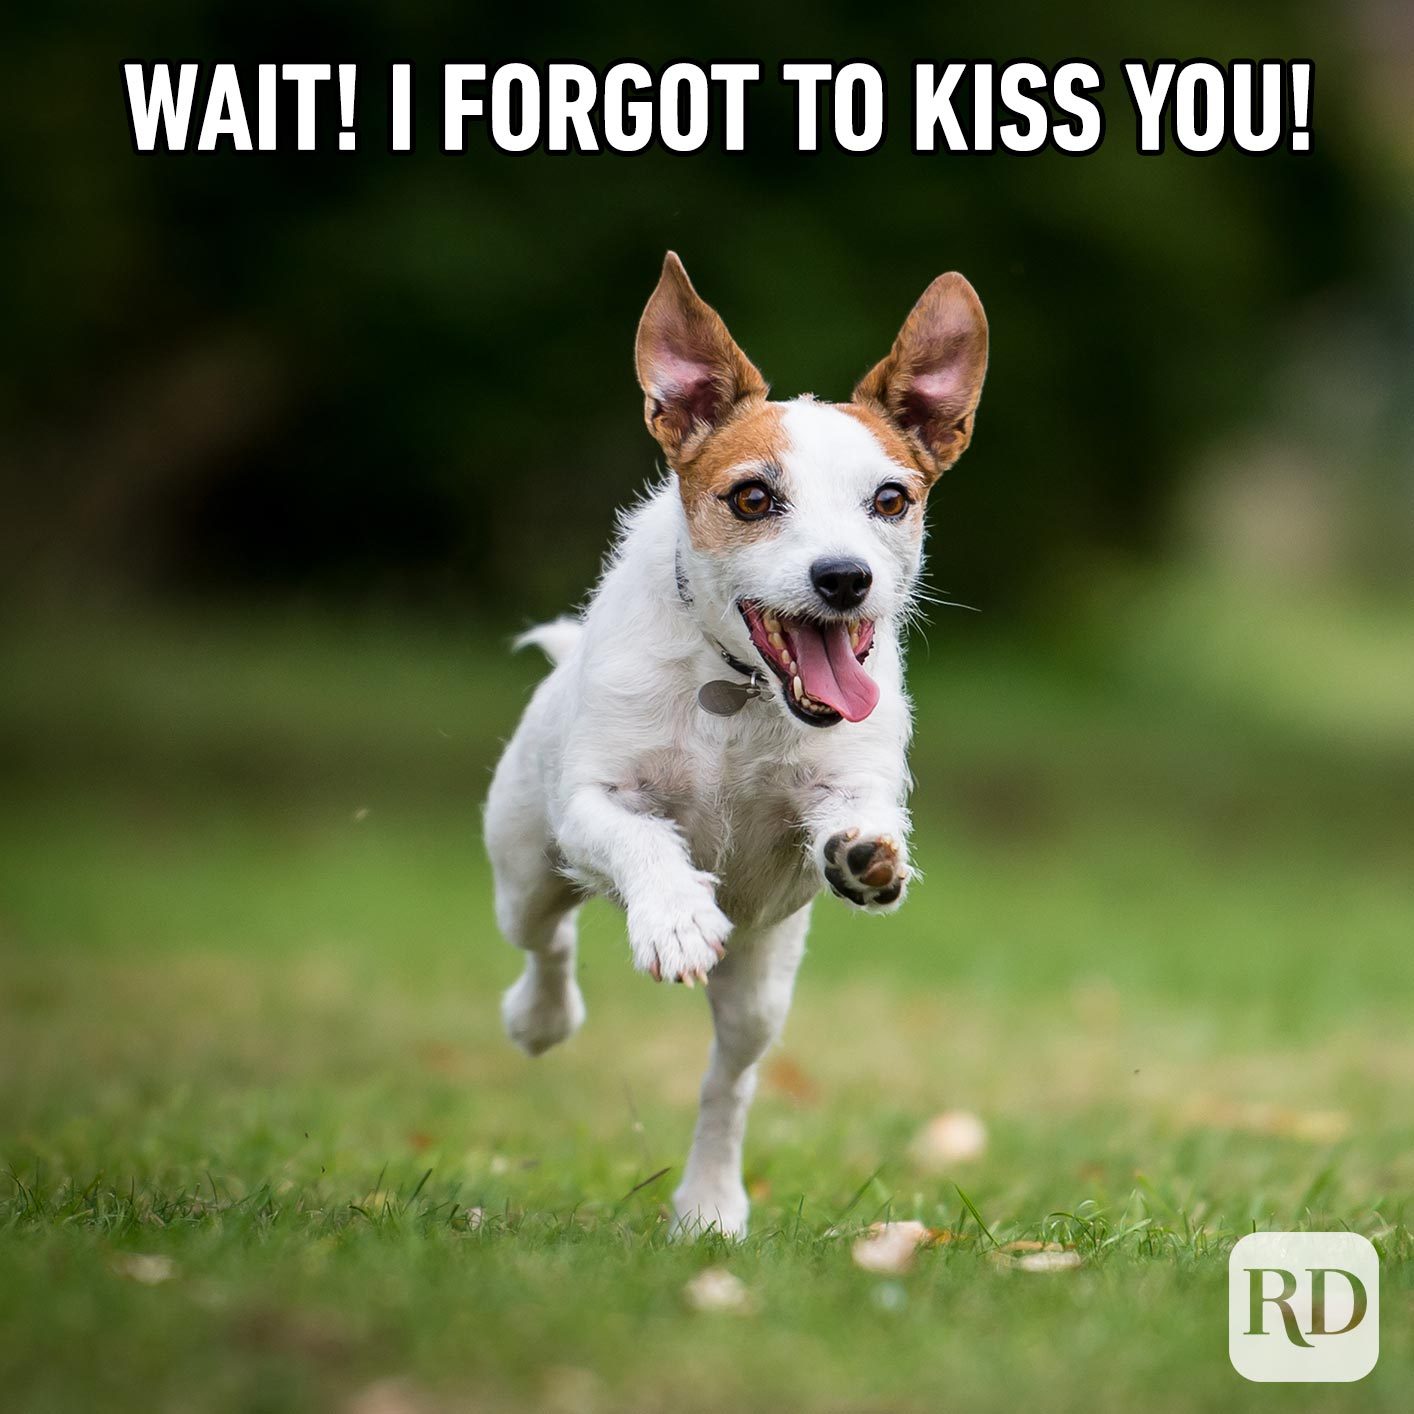 Dog leaping over grass. Meme text: Wait! I forgot to kiss you!